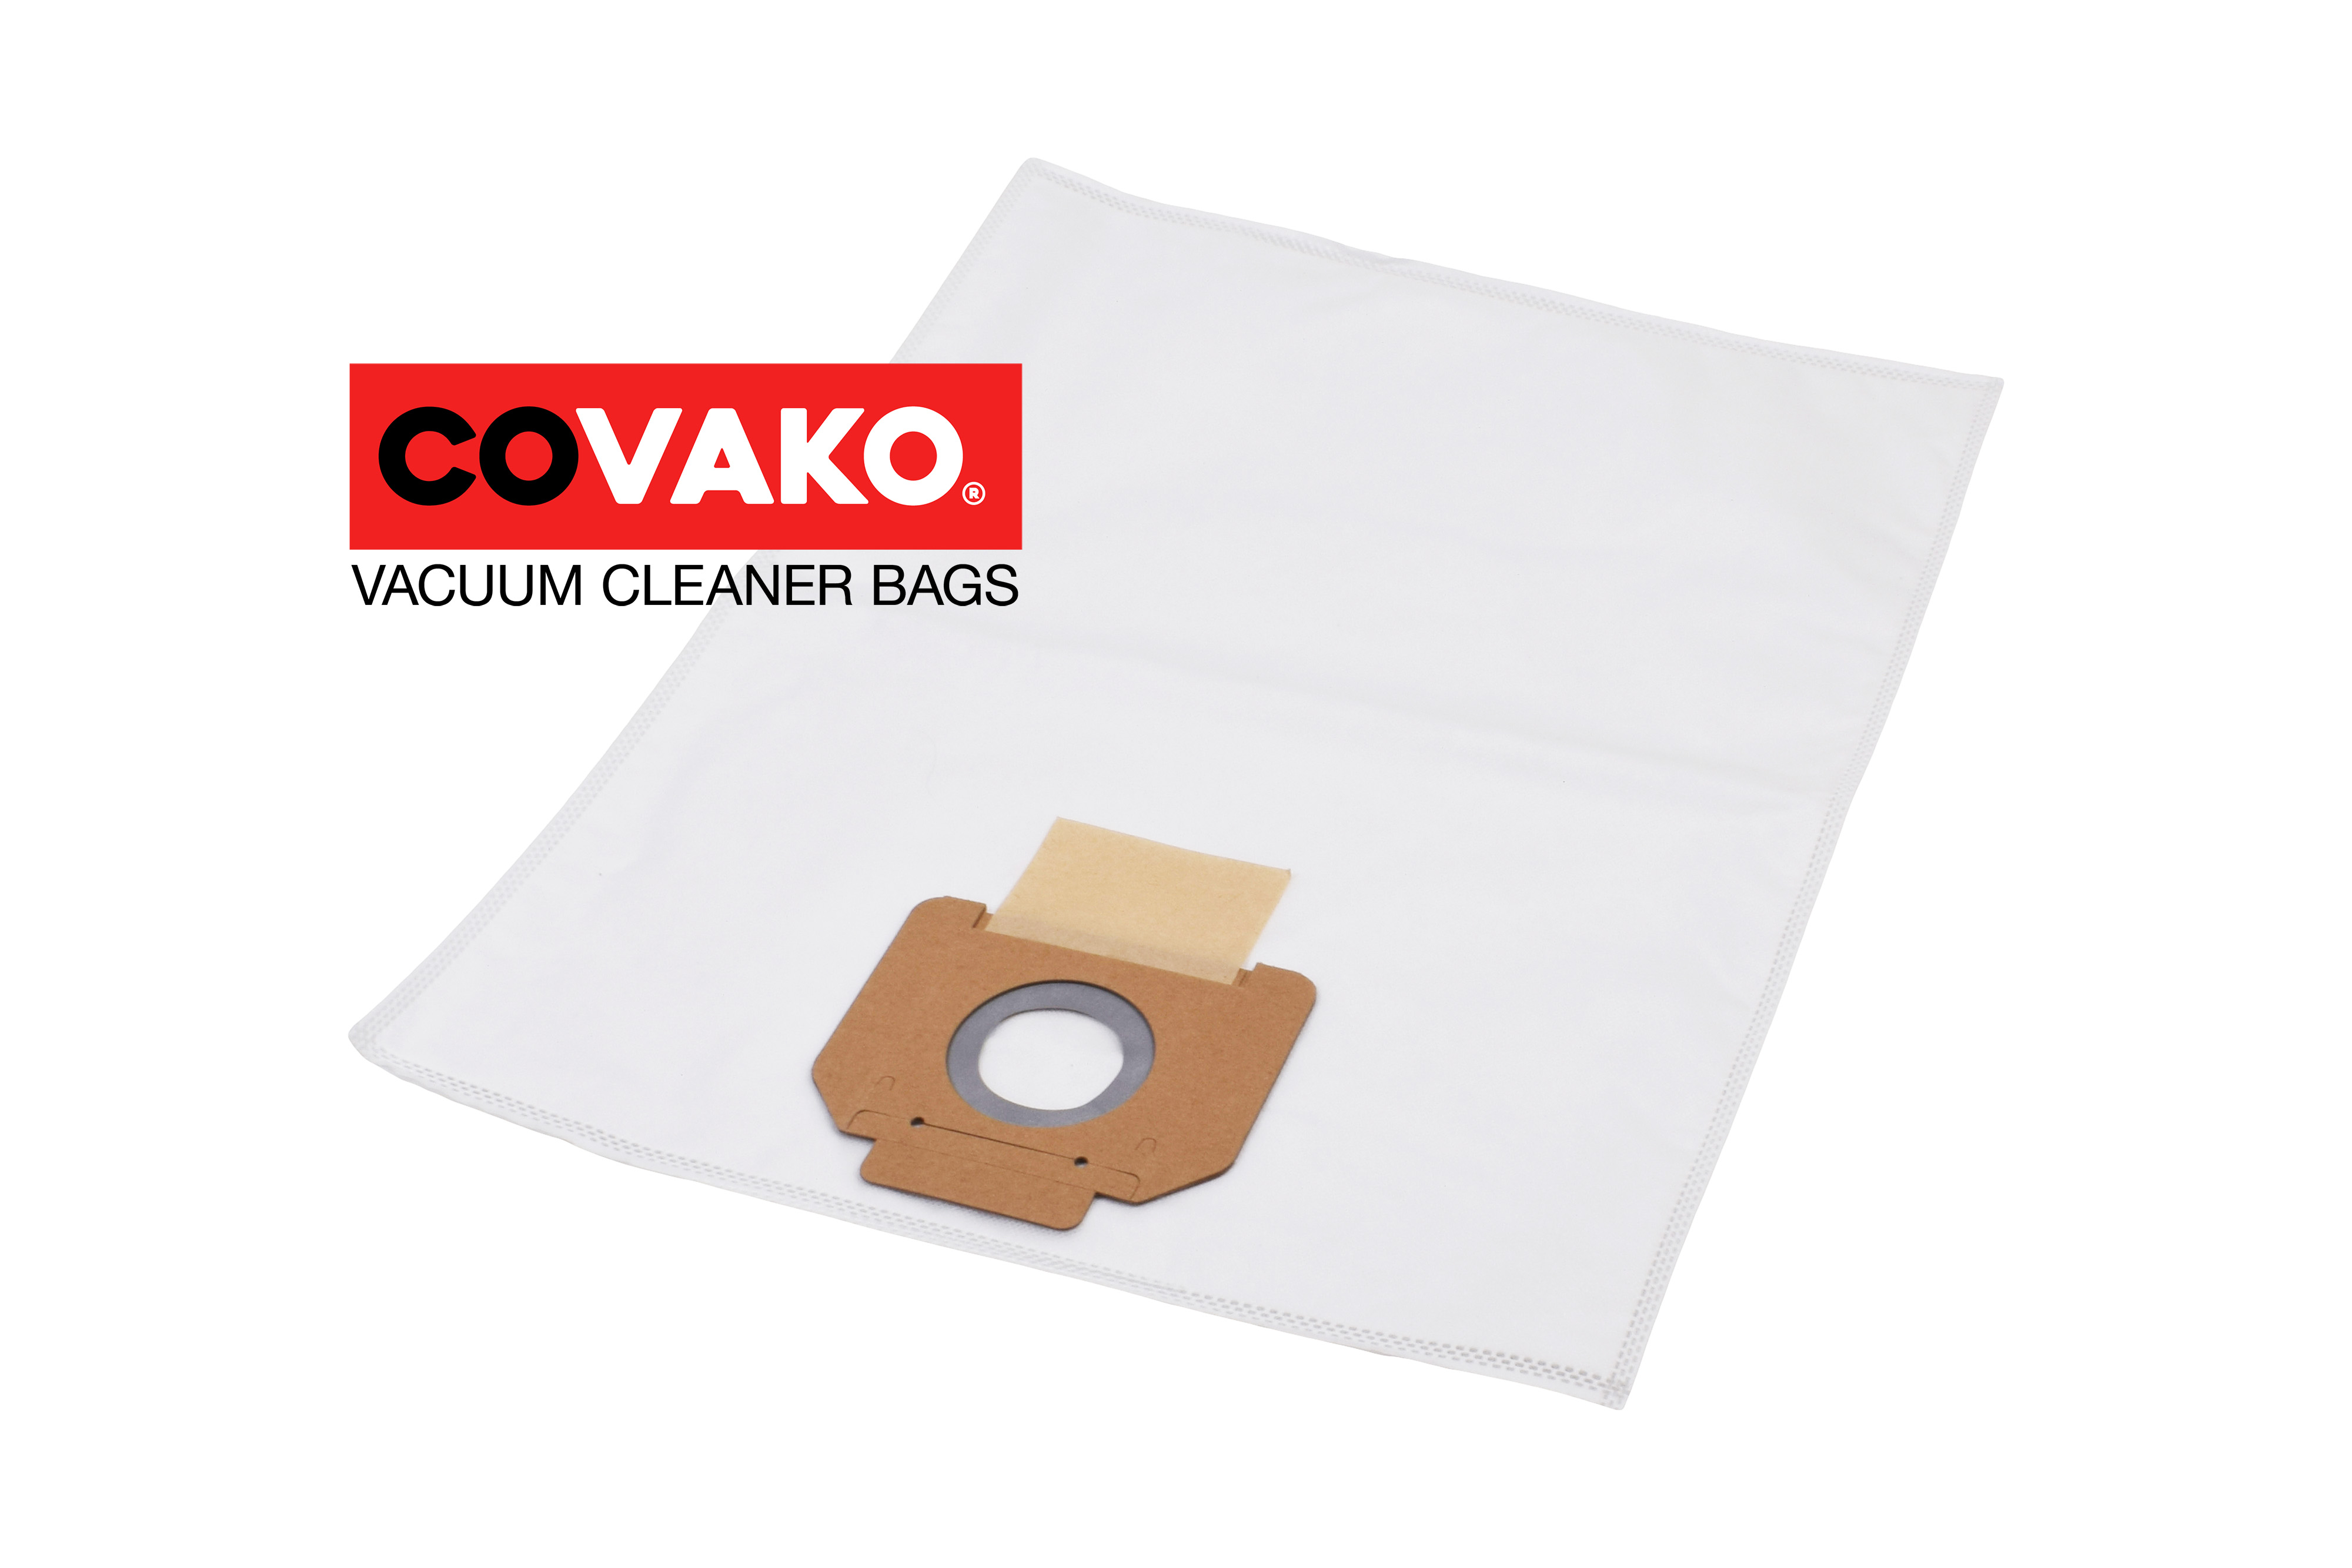 Kärcher NT 361 Eco M A / Synthesis - Kärcher vacuum cleaner bags